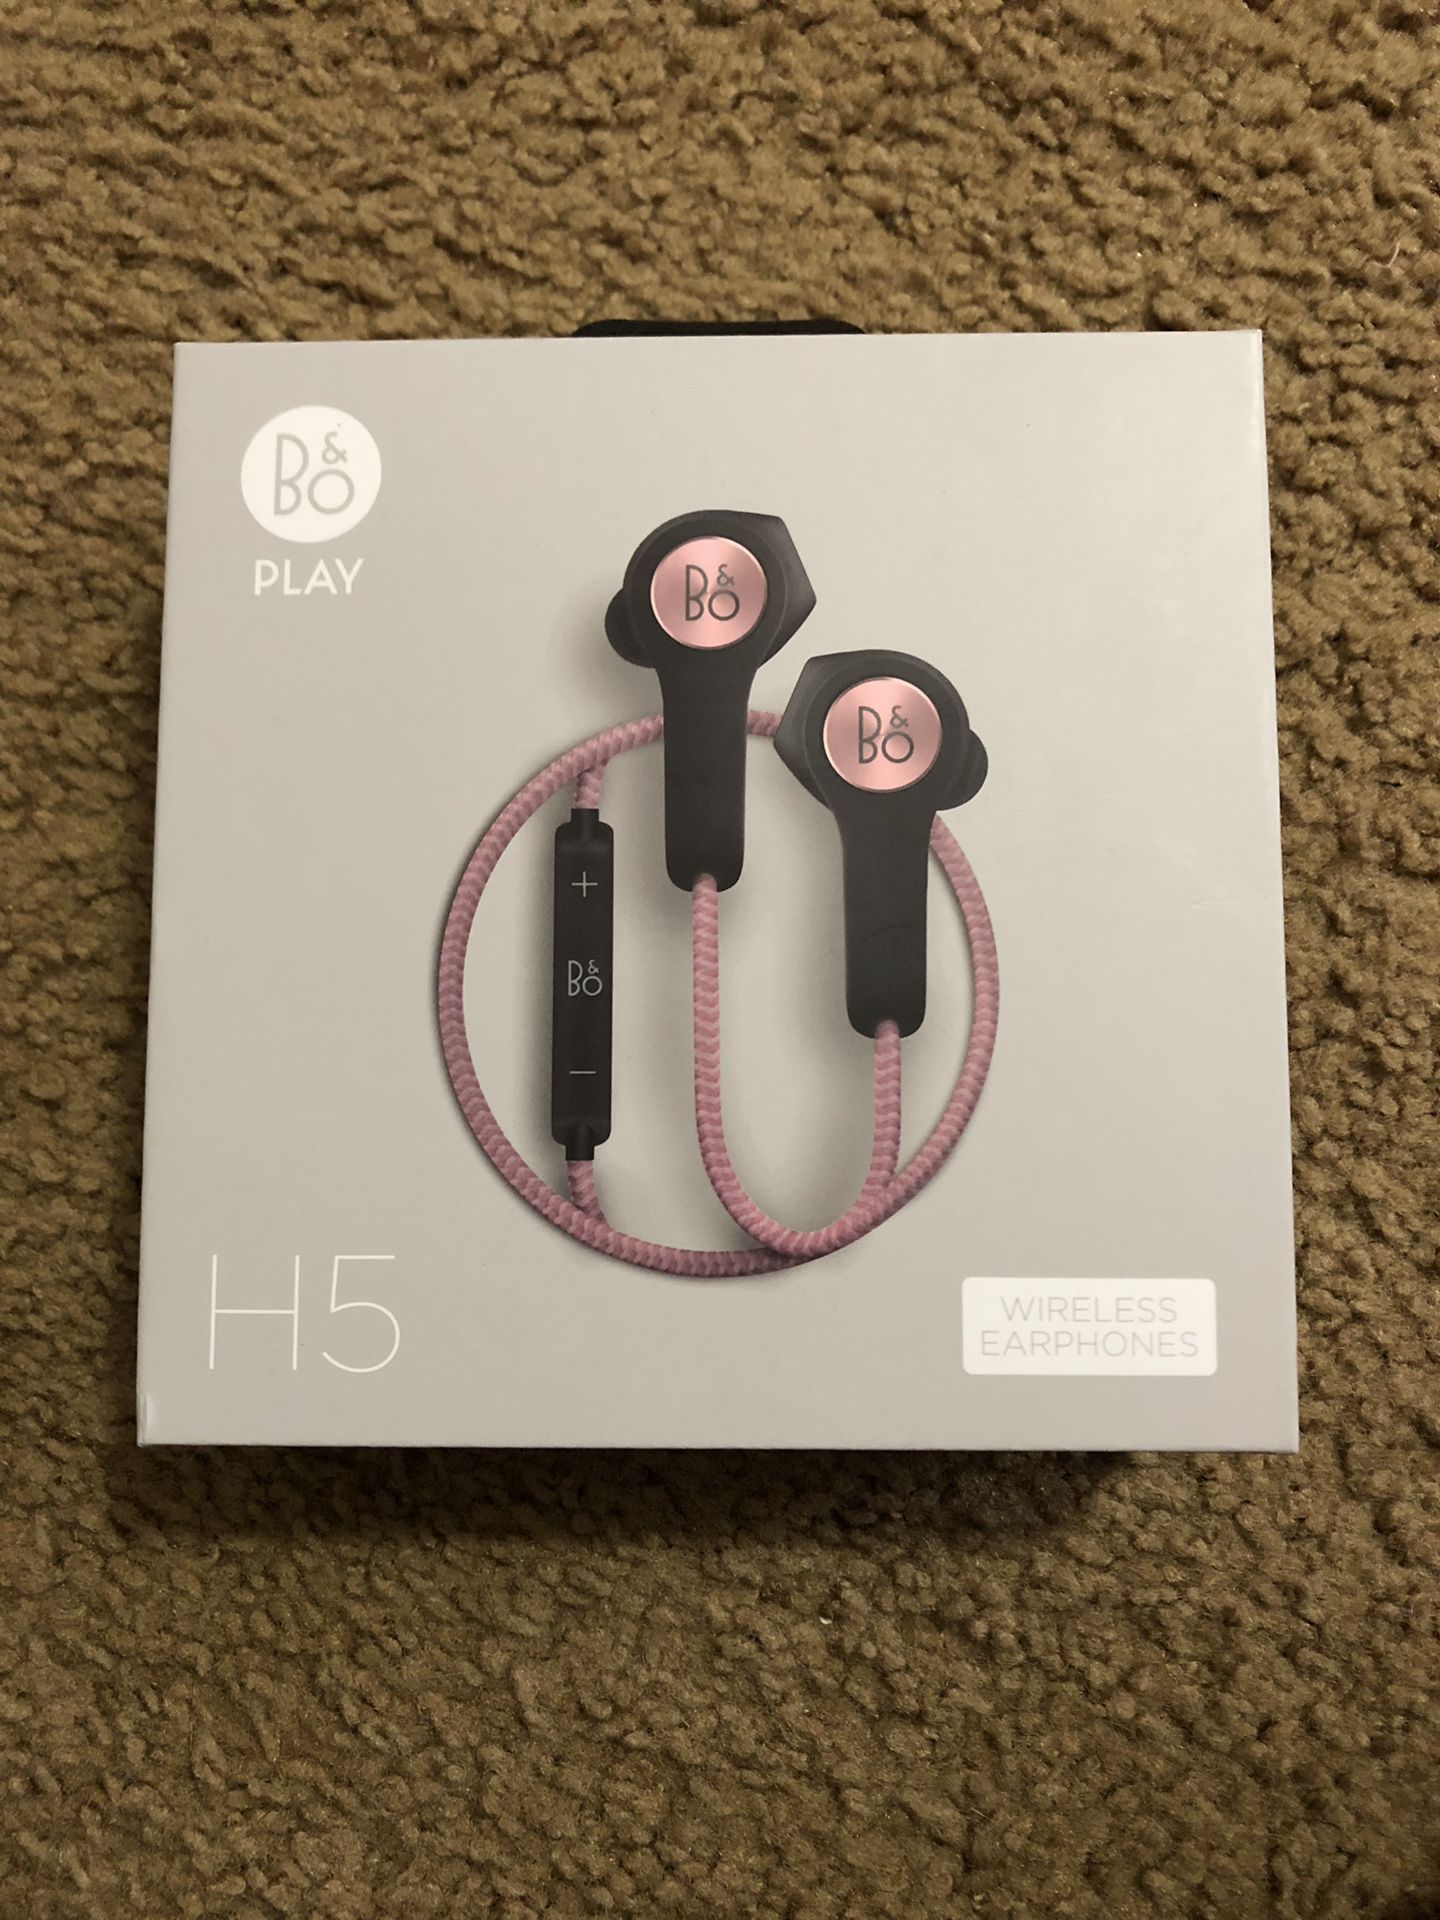 Bang & Olufsen, Beoplay H5 wireless earbuds